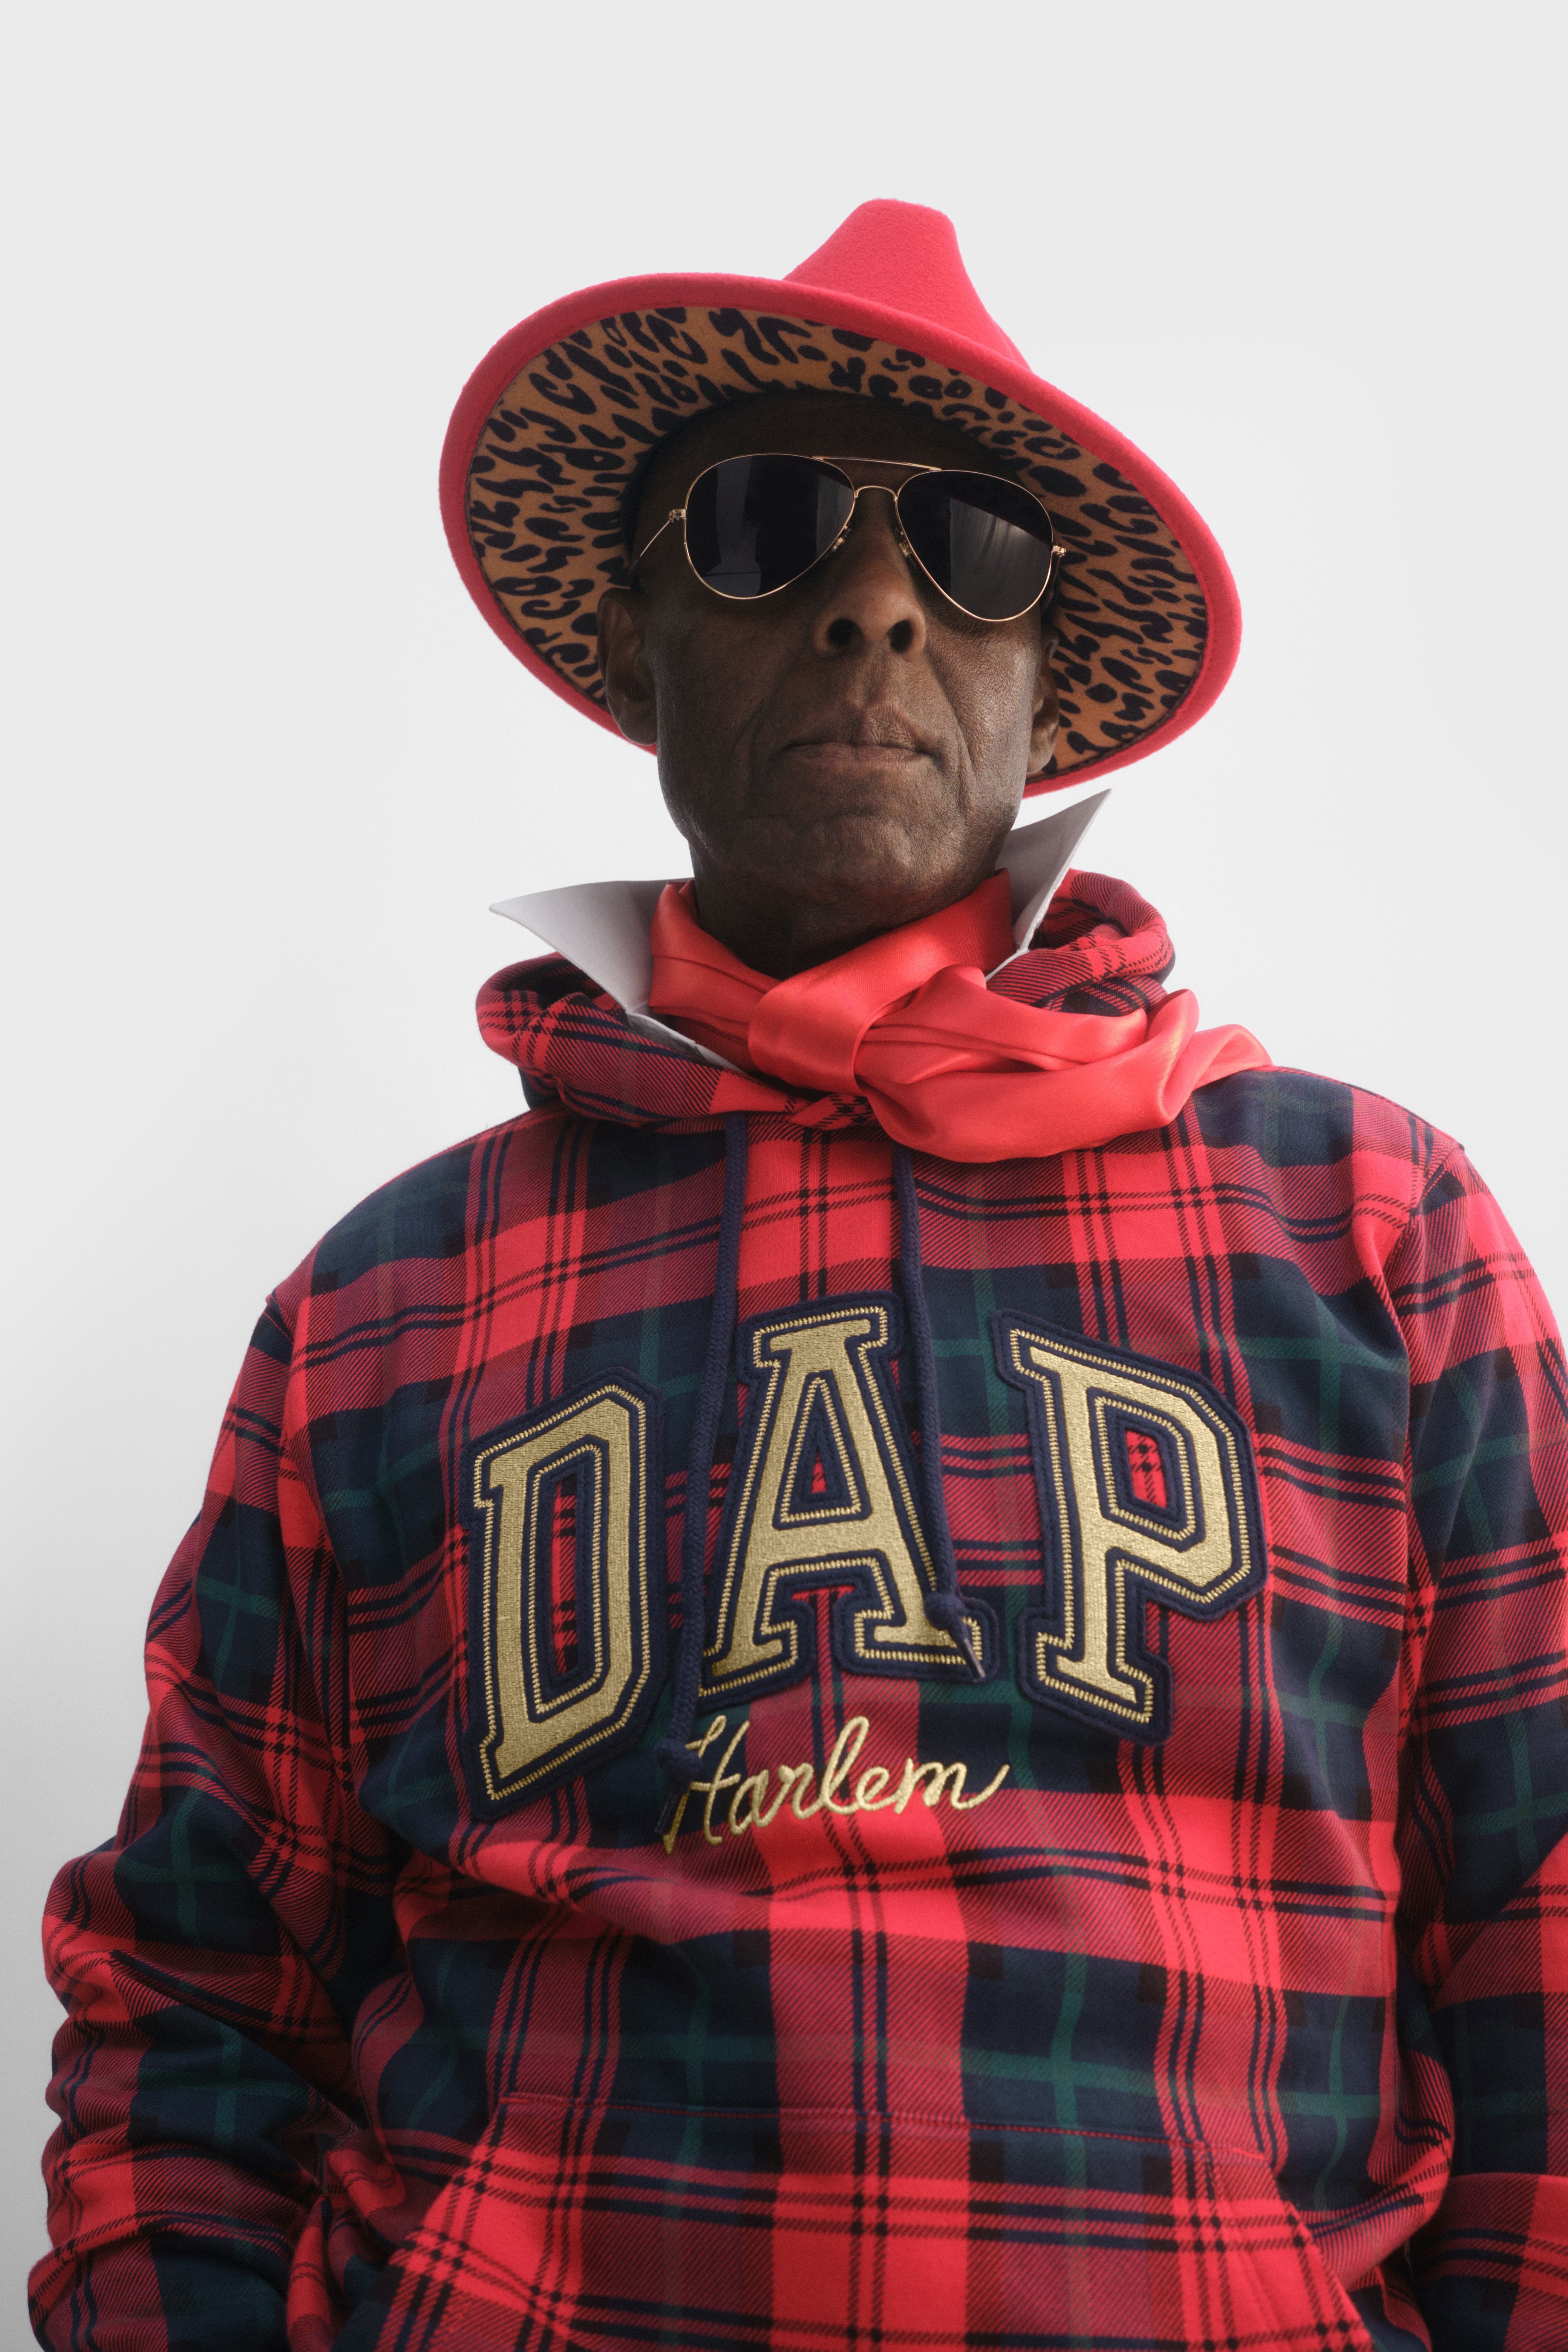 Dapper Dan' Gets Back to Harlem's Roots - The New York Times